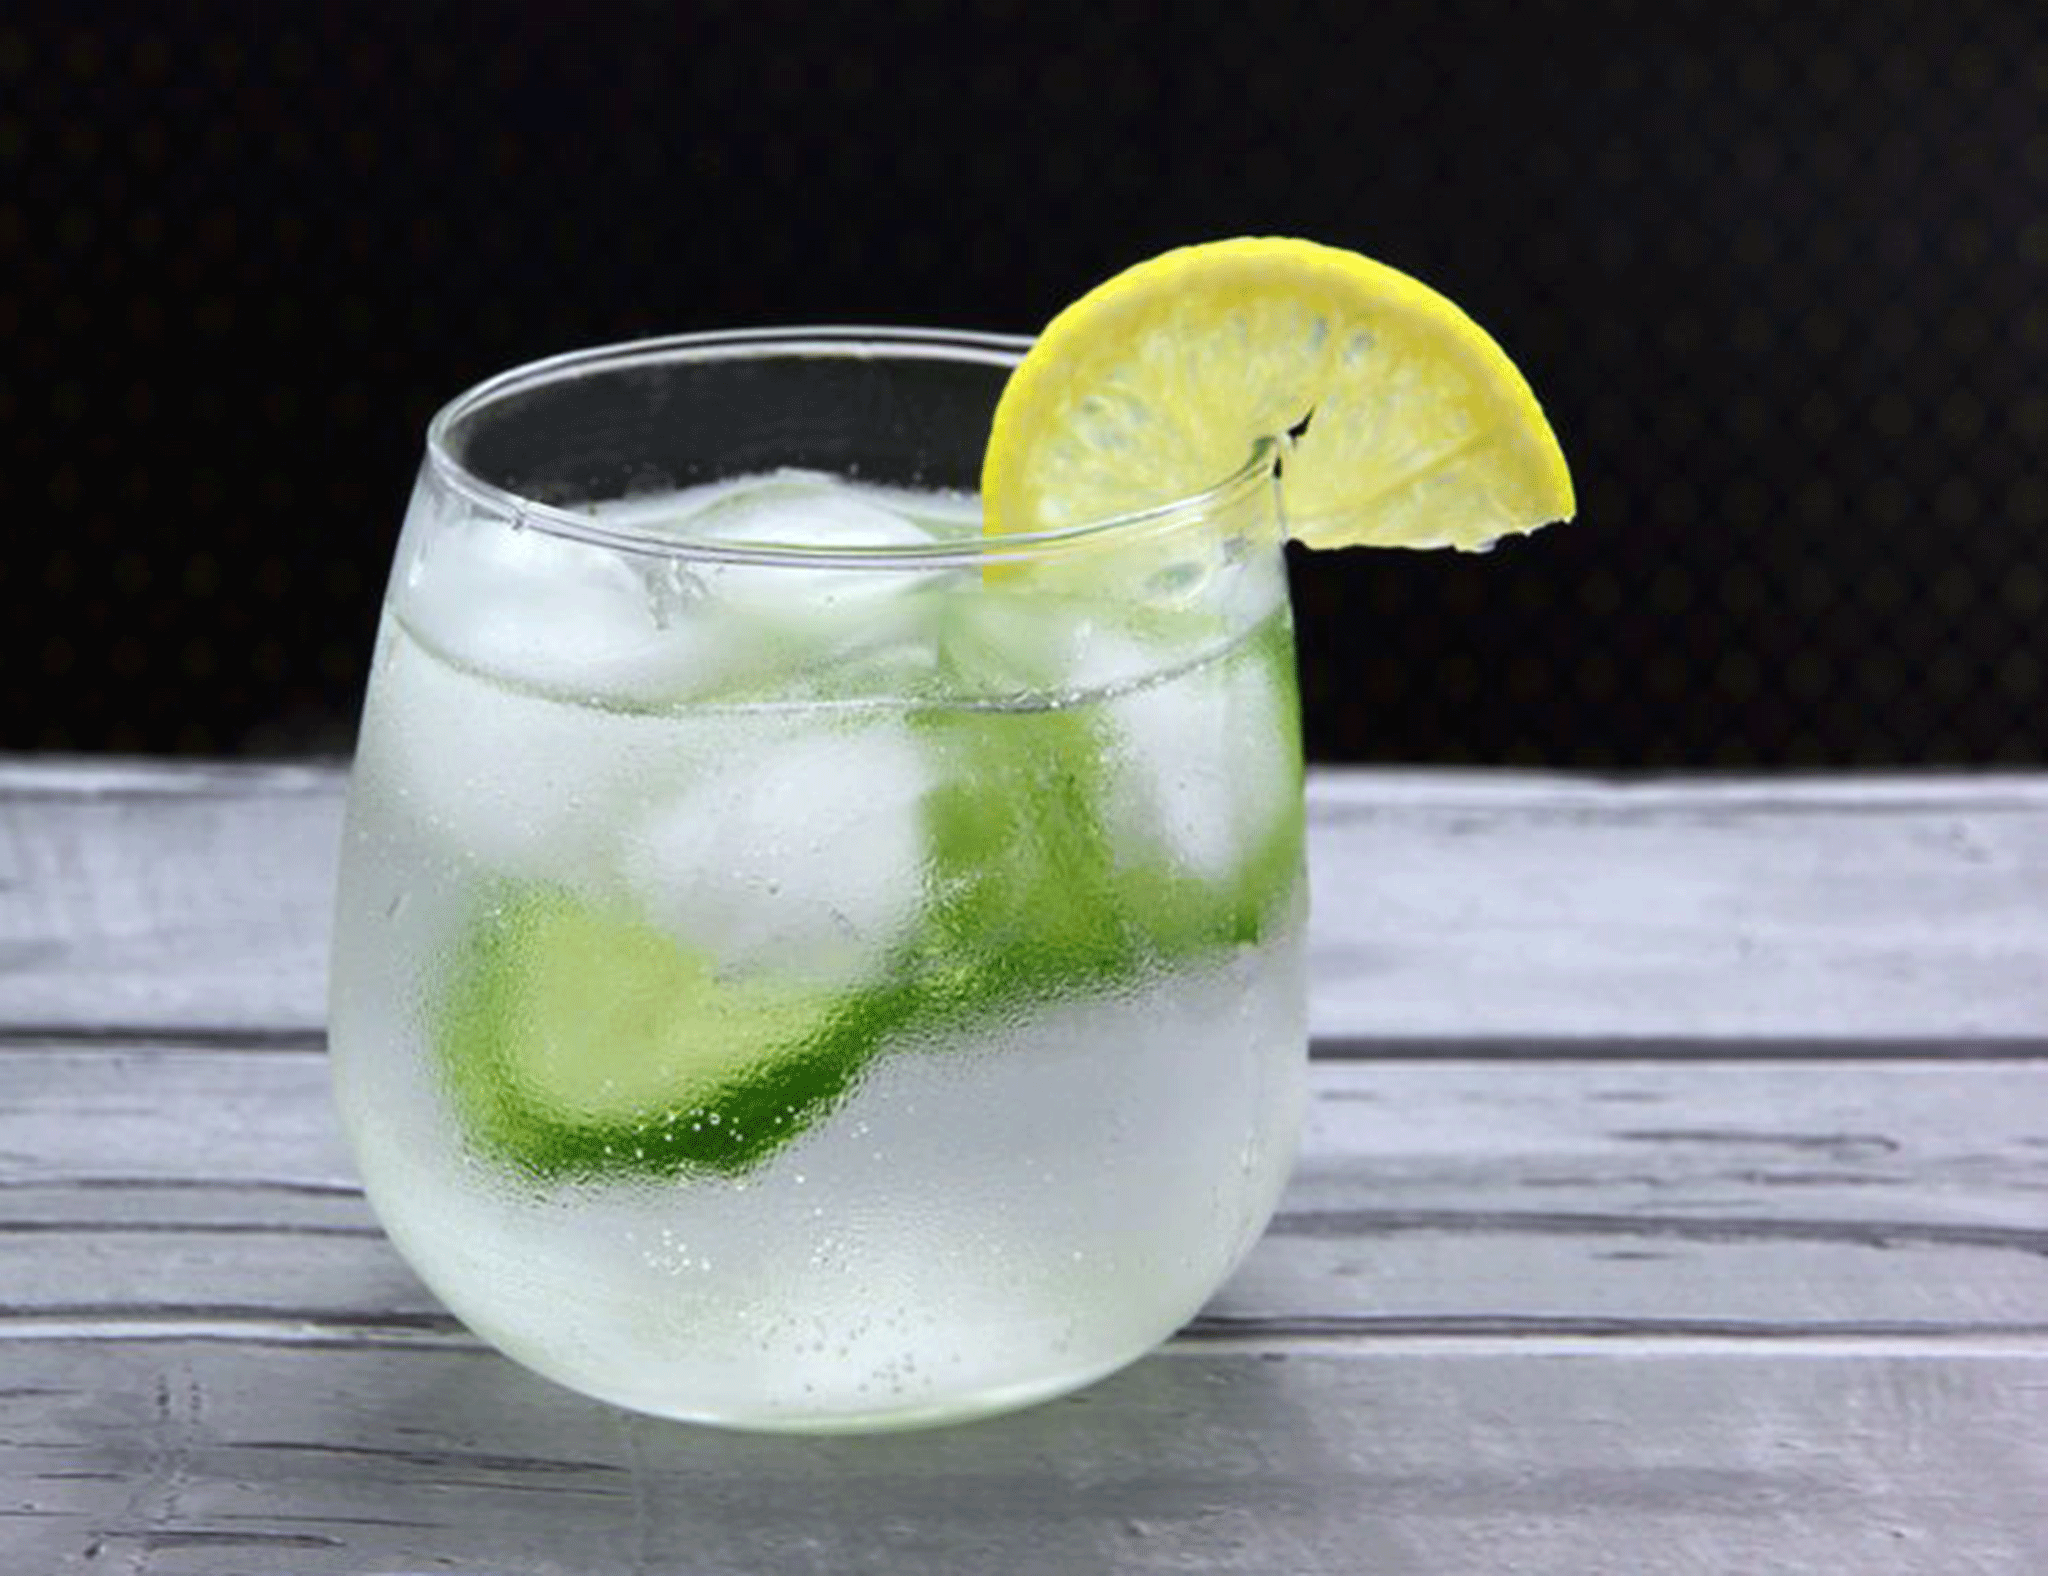 Record sales of gin as Britain knocks back over 1 billion g&t's